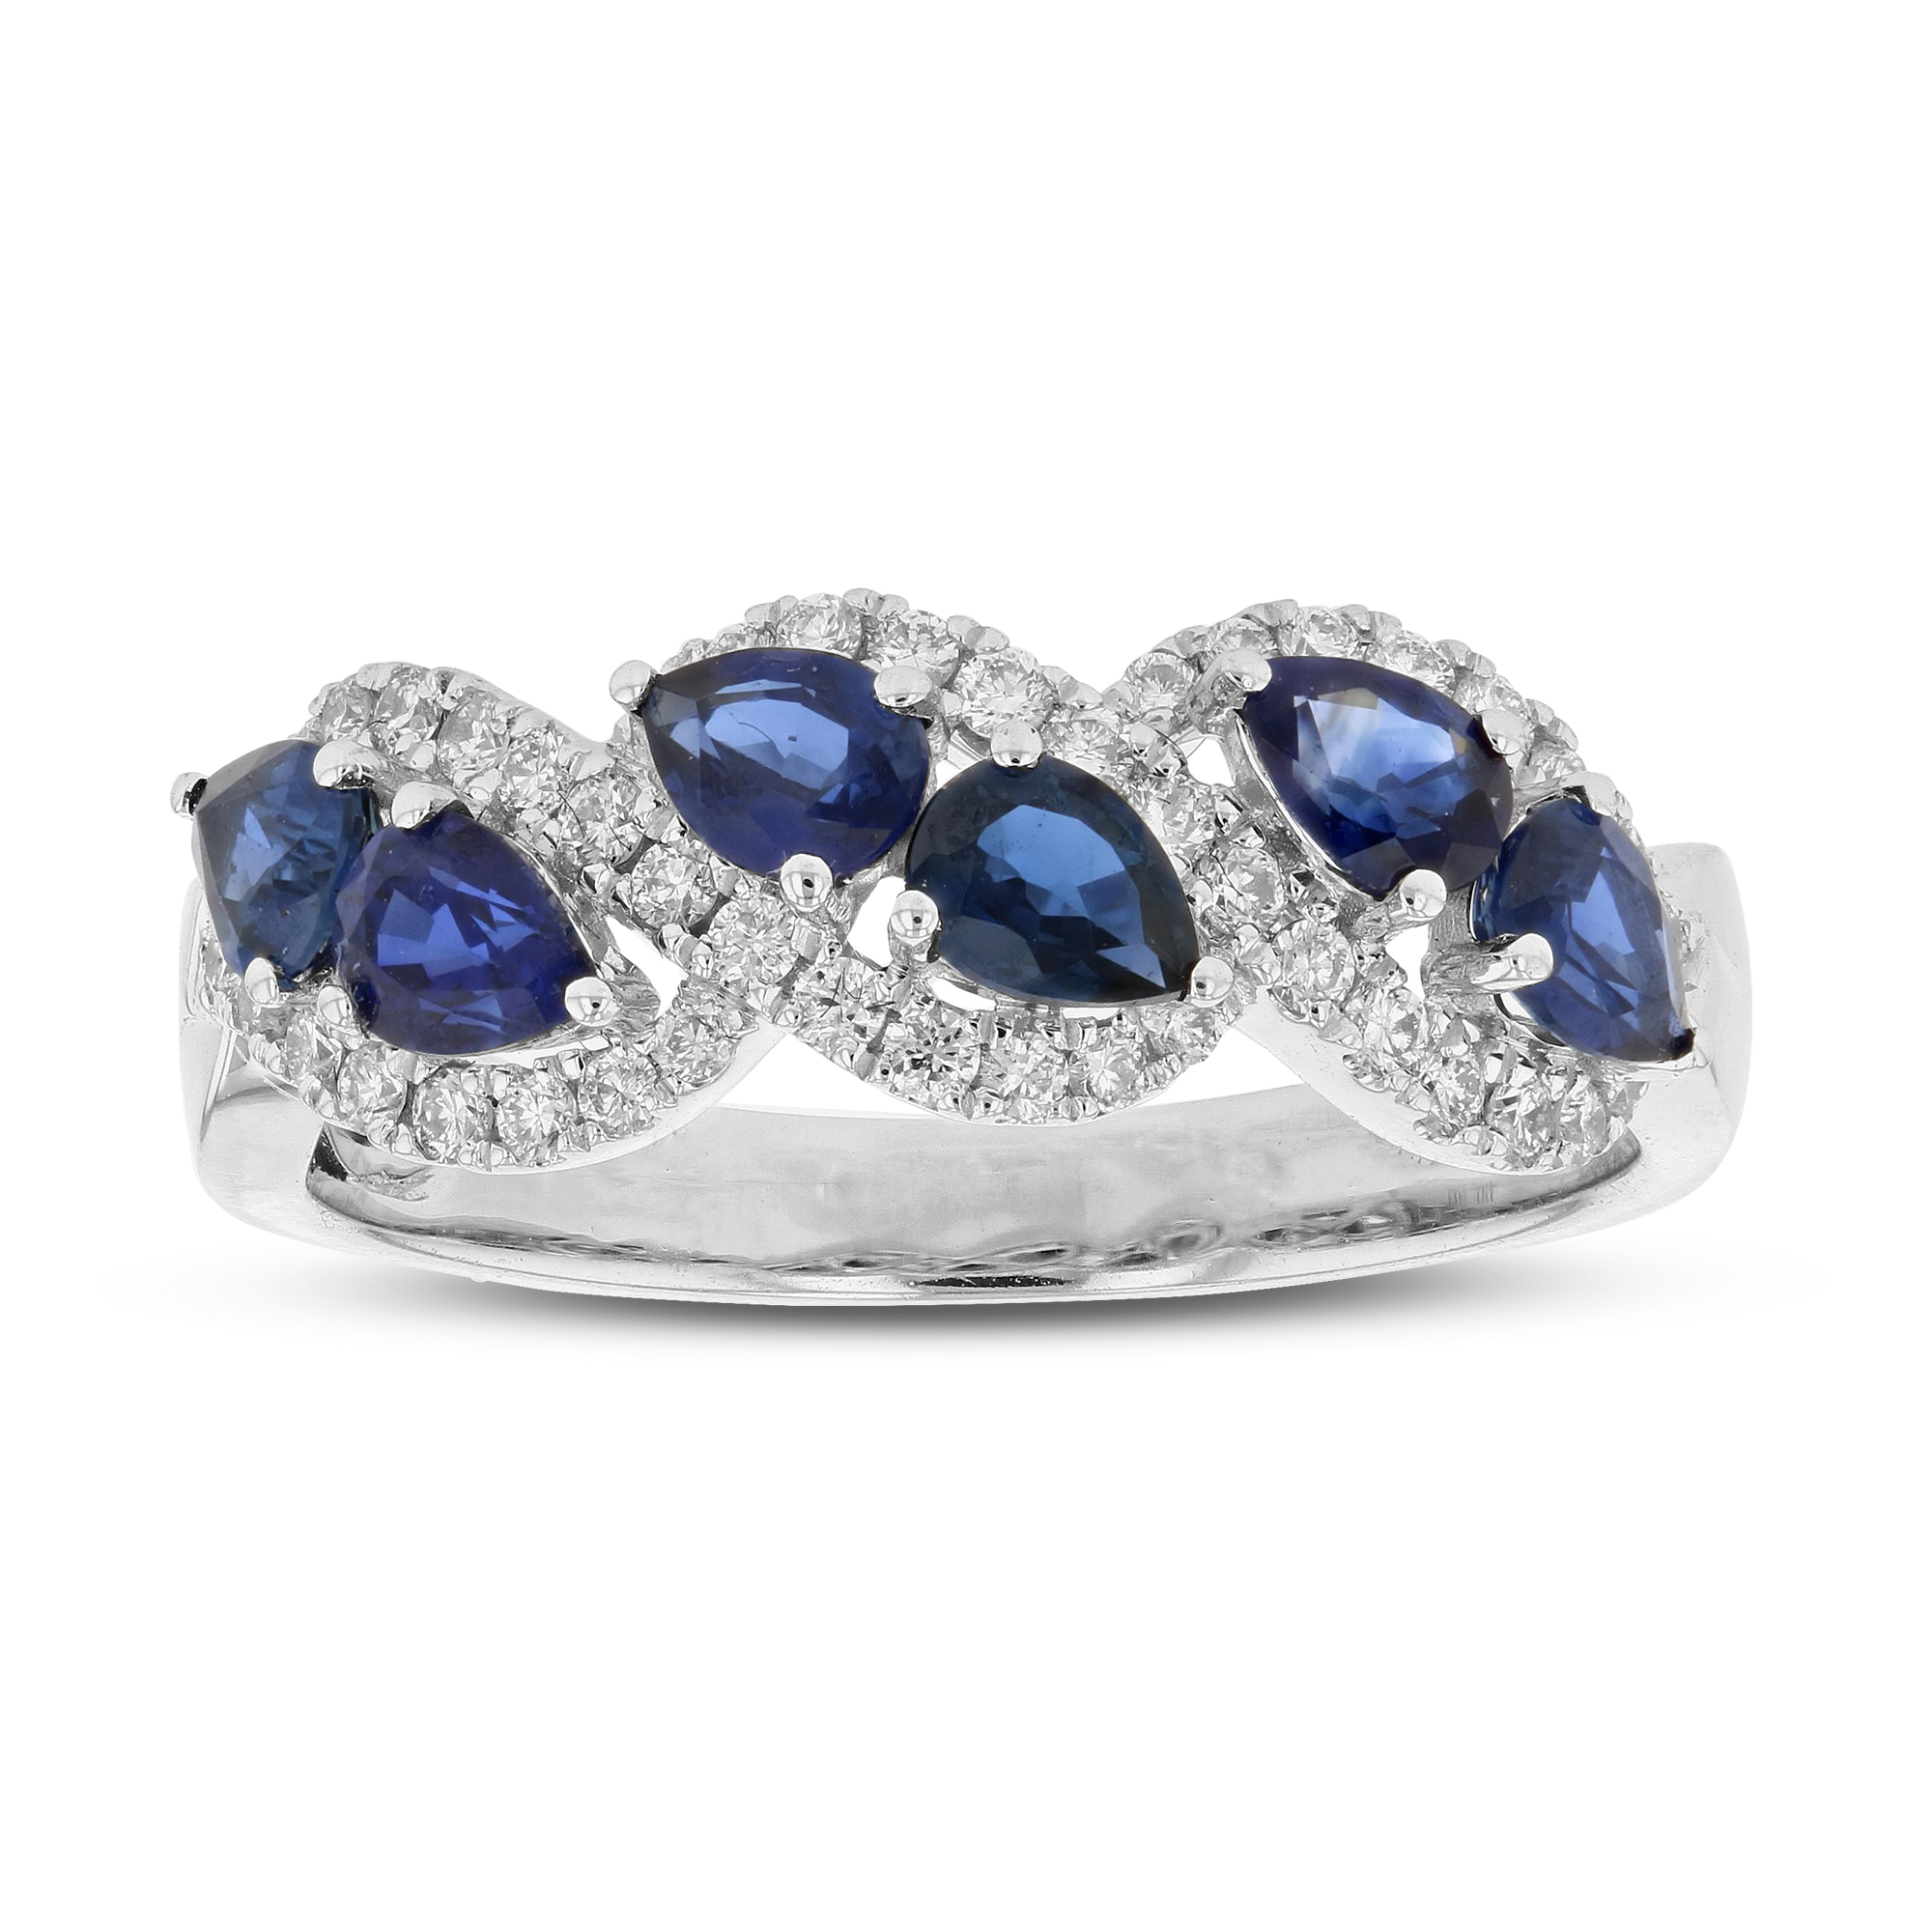 View 1.54ctw Diamond and Sapphire Band in 18k White Gold